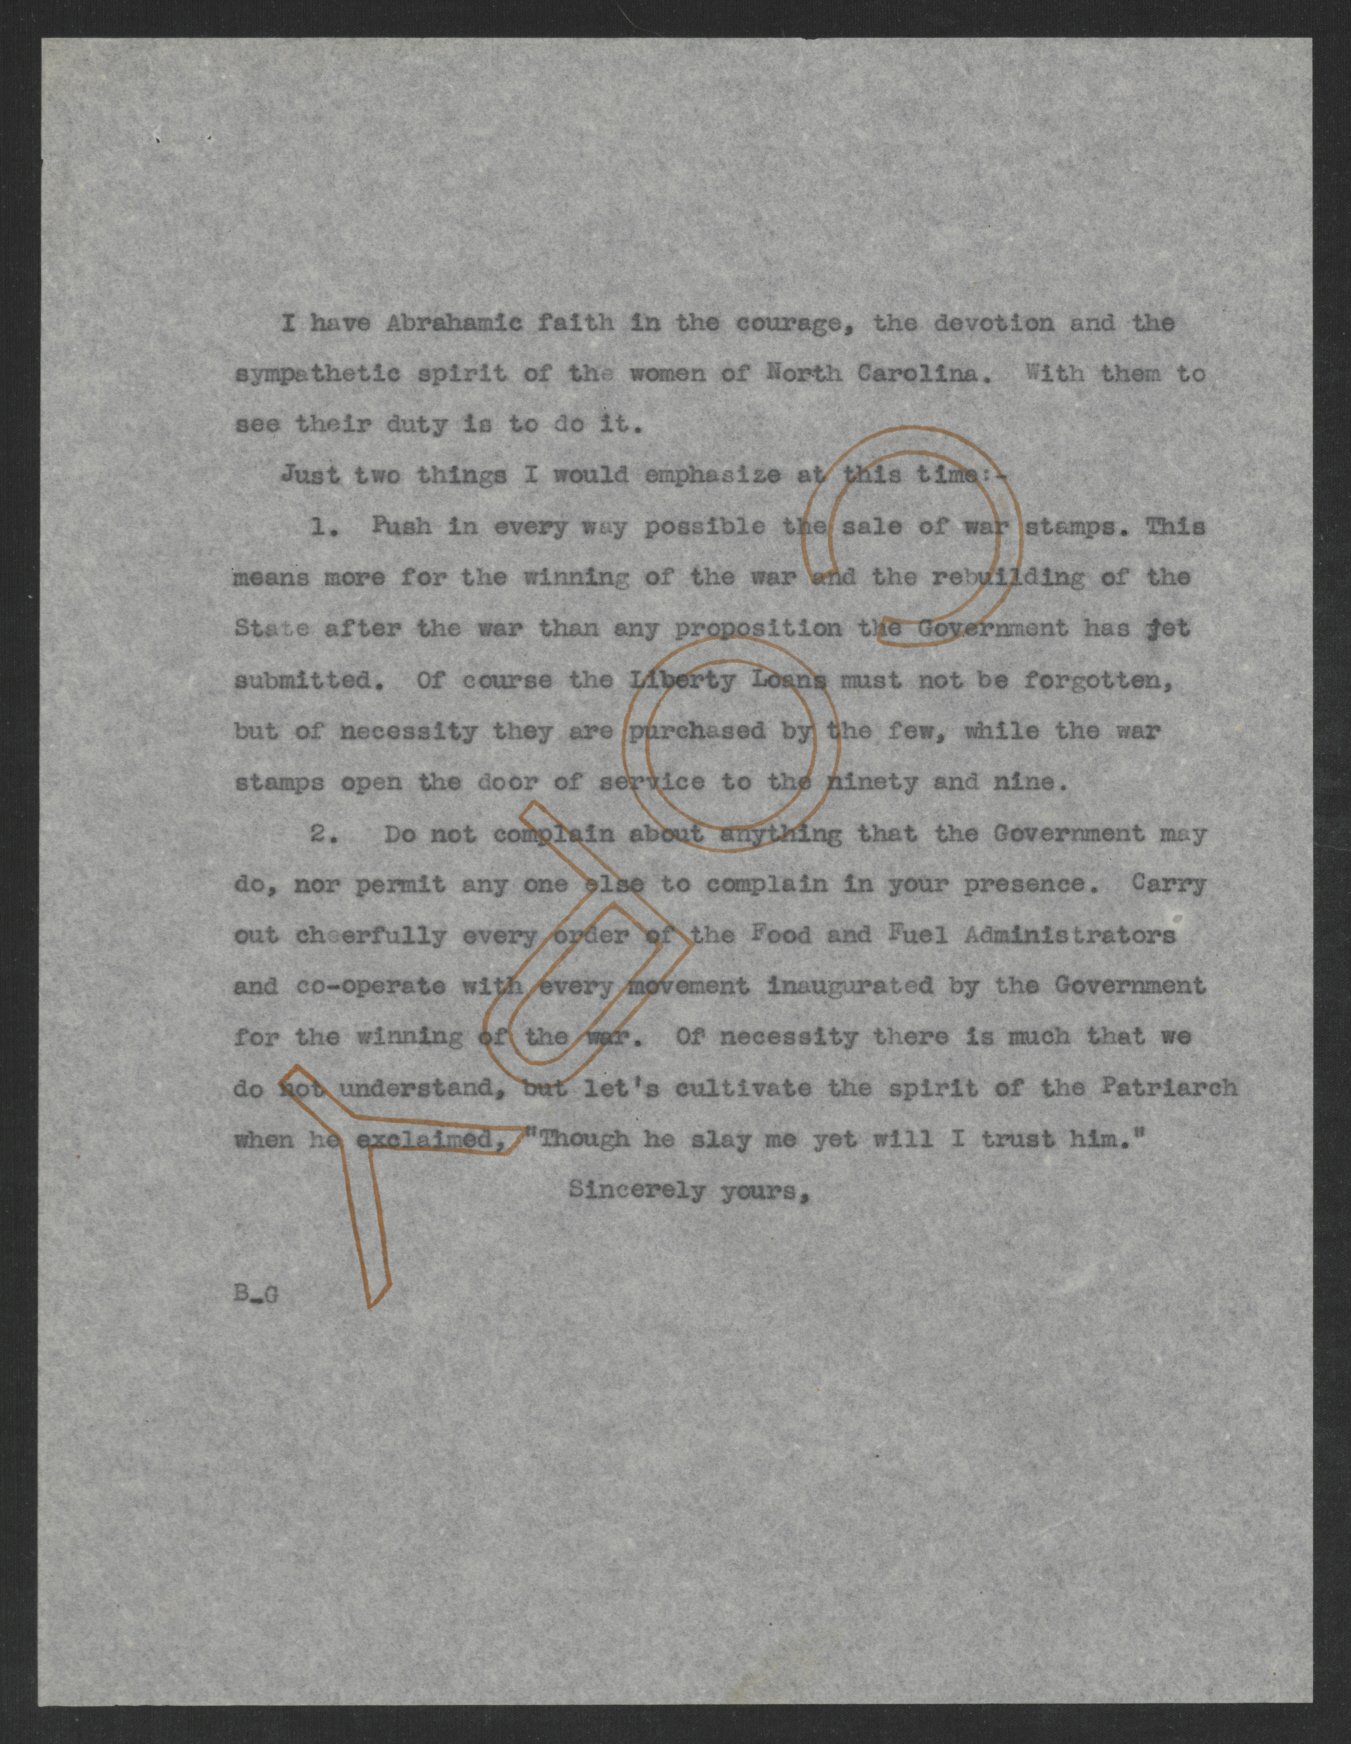 Letter from Thomas W. Bickett to Kate A. B. Johnson, February 18, 1918, page 2